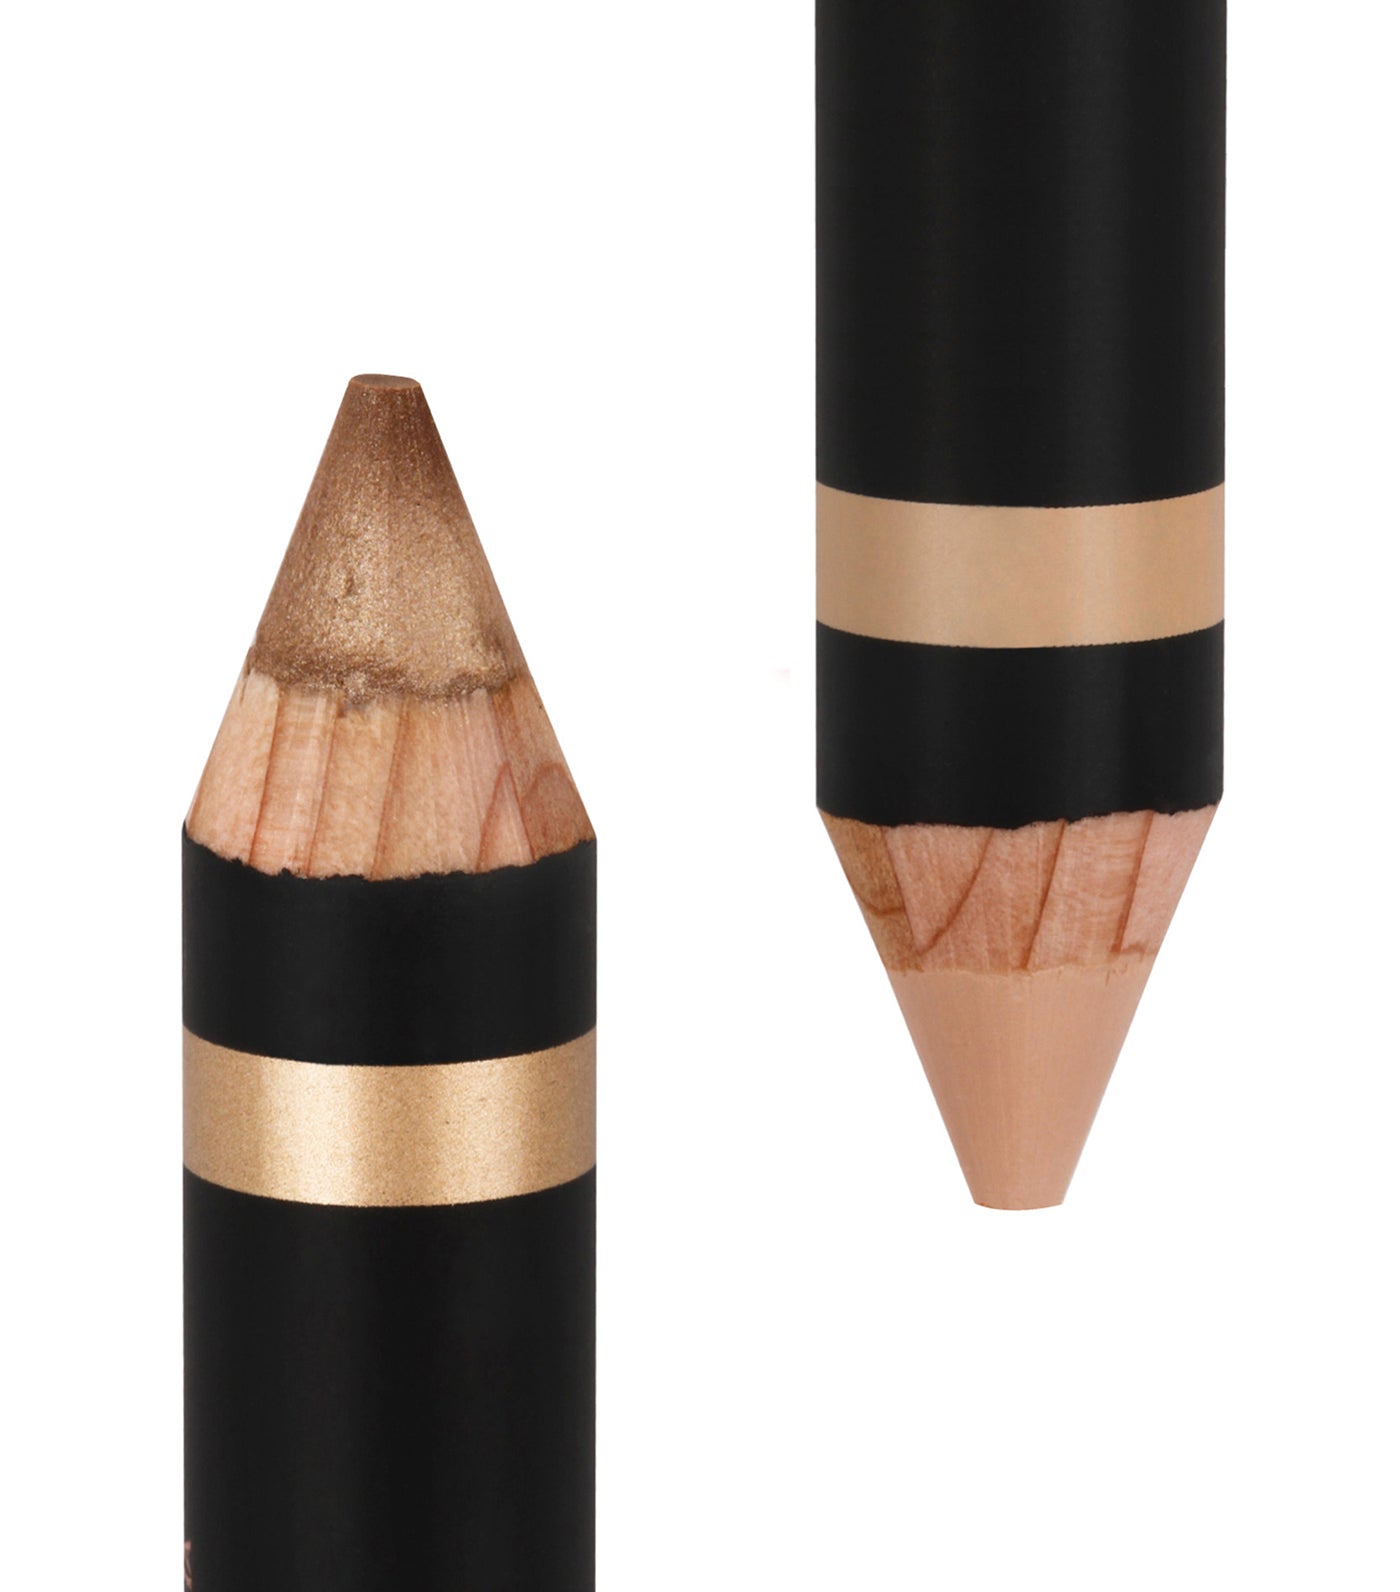 anastasia beverly hills shell/lace shimmer highlighting duo pencil